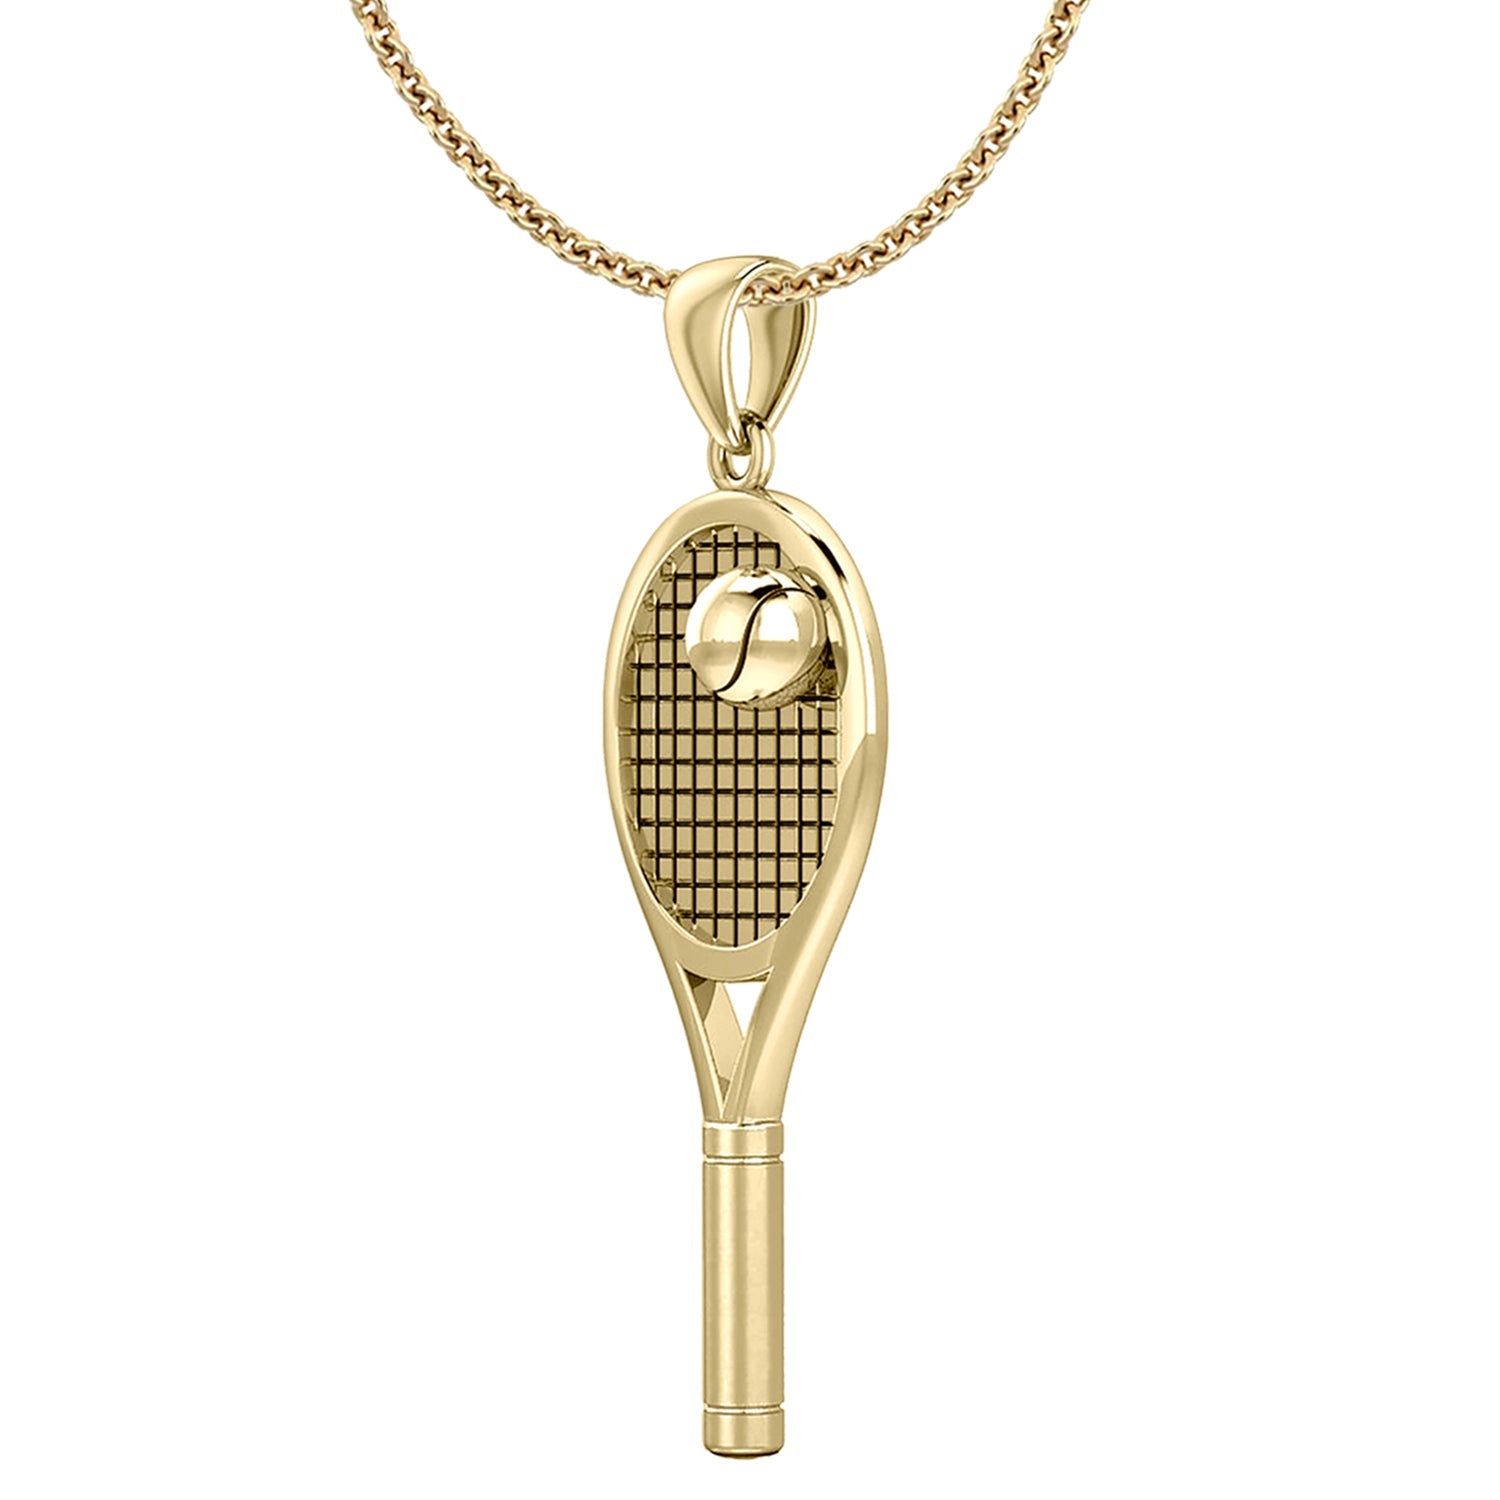 Small 10K or 14K Yellow Gold 3D Tennis Racket & Ball Pendant Necklace, 27mm - US Jewels